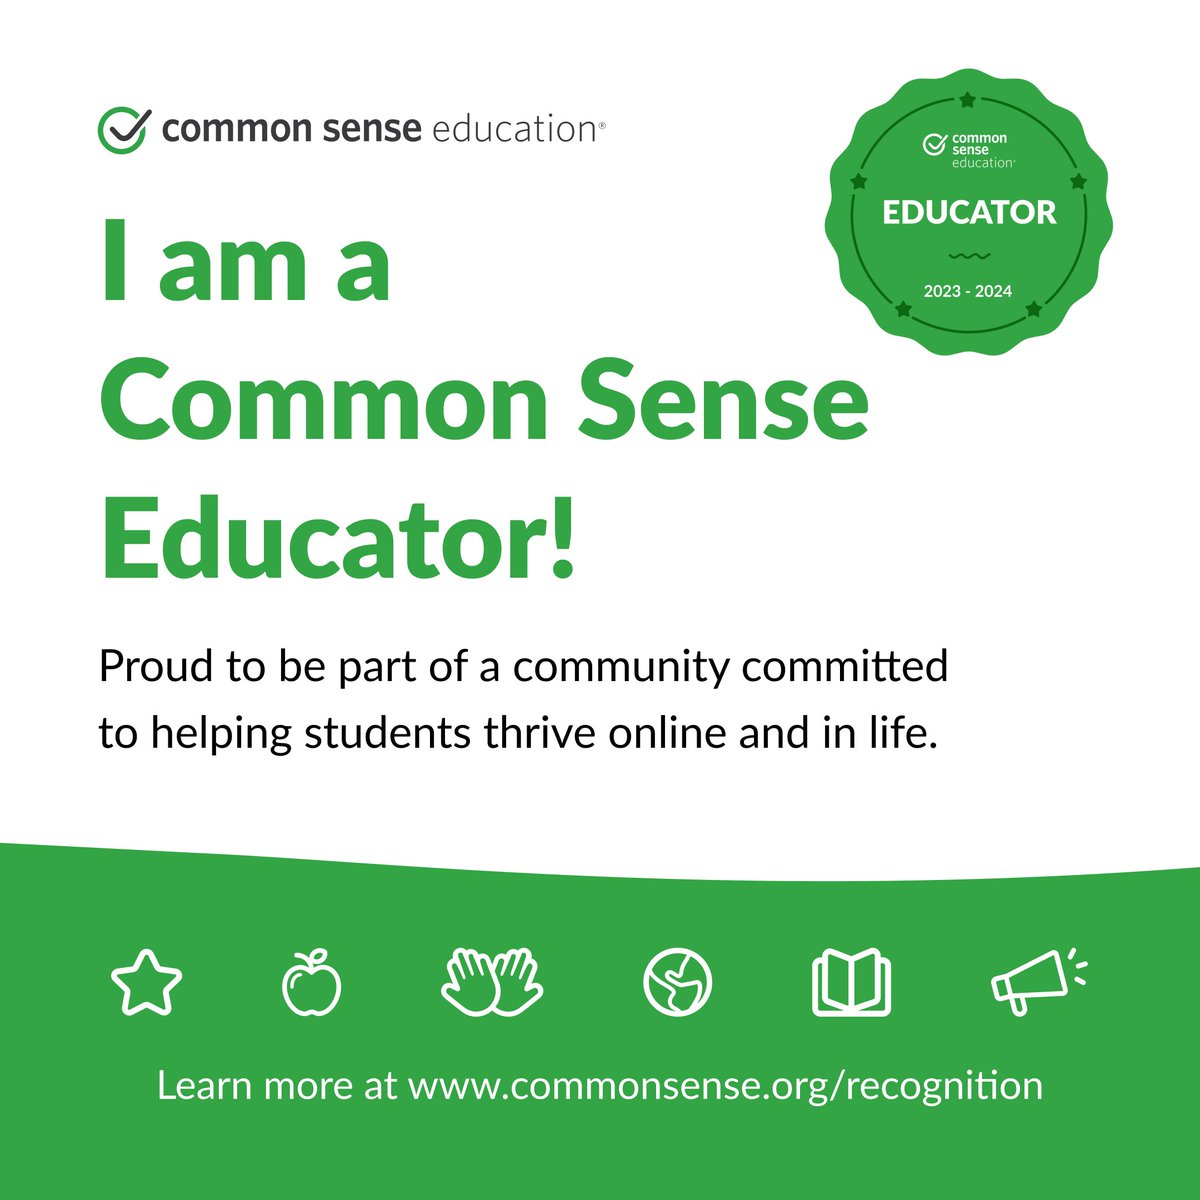 A new badge for a new year!
#CommonSenseEducator